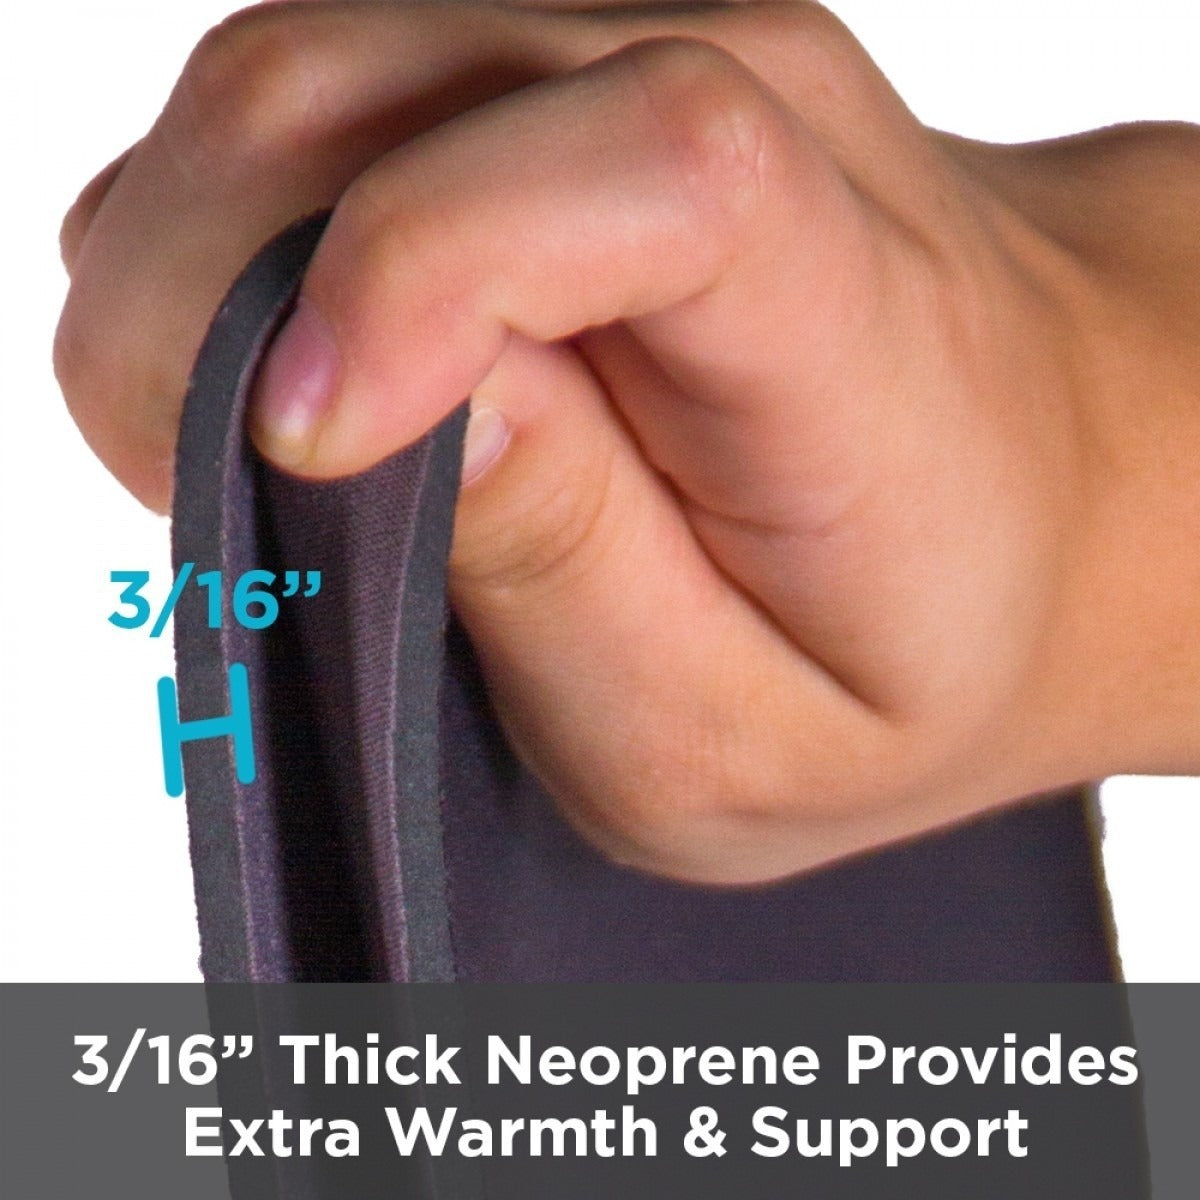 3/16-inch thick, water-resistant neoprene provides extra warmth and knee support